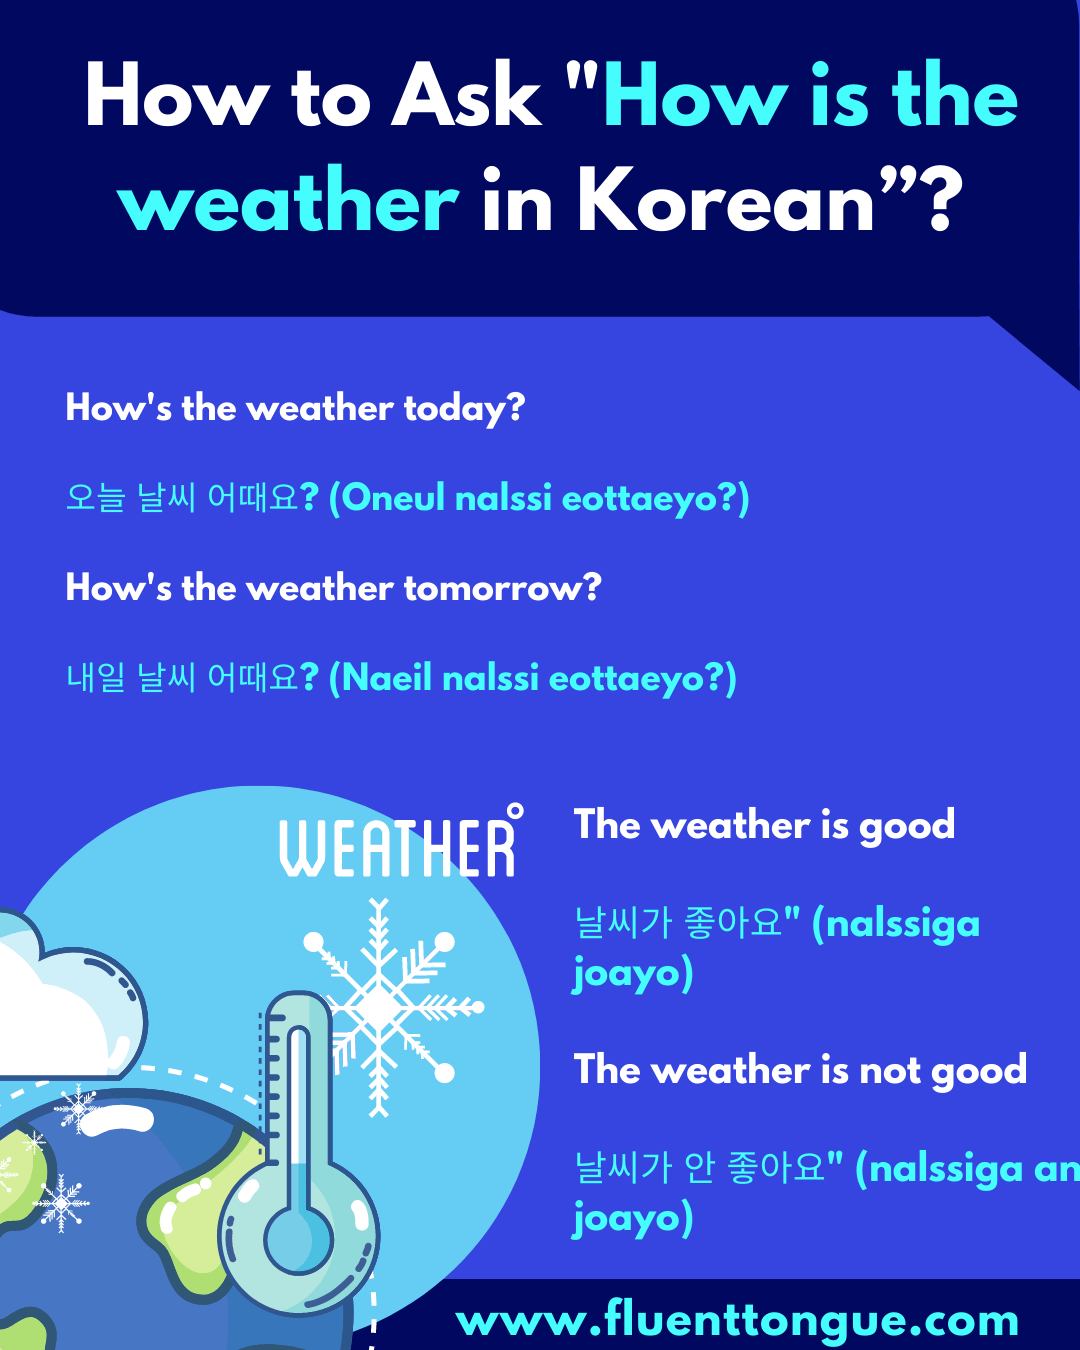 How to Ask "How is the weather in Korean”?